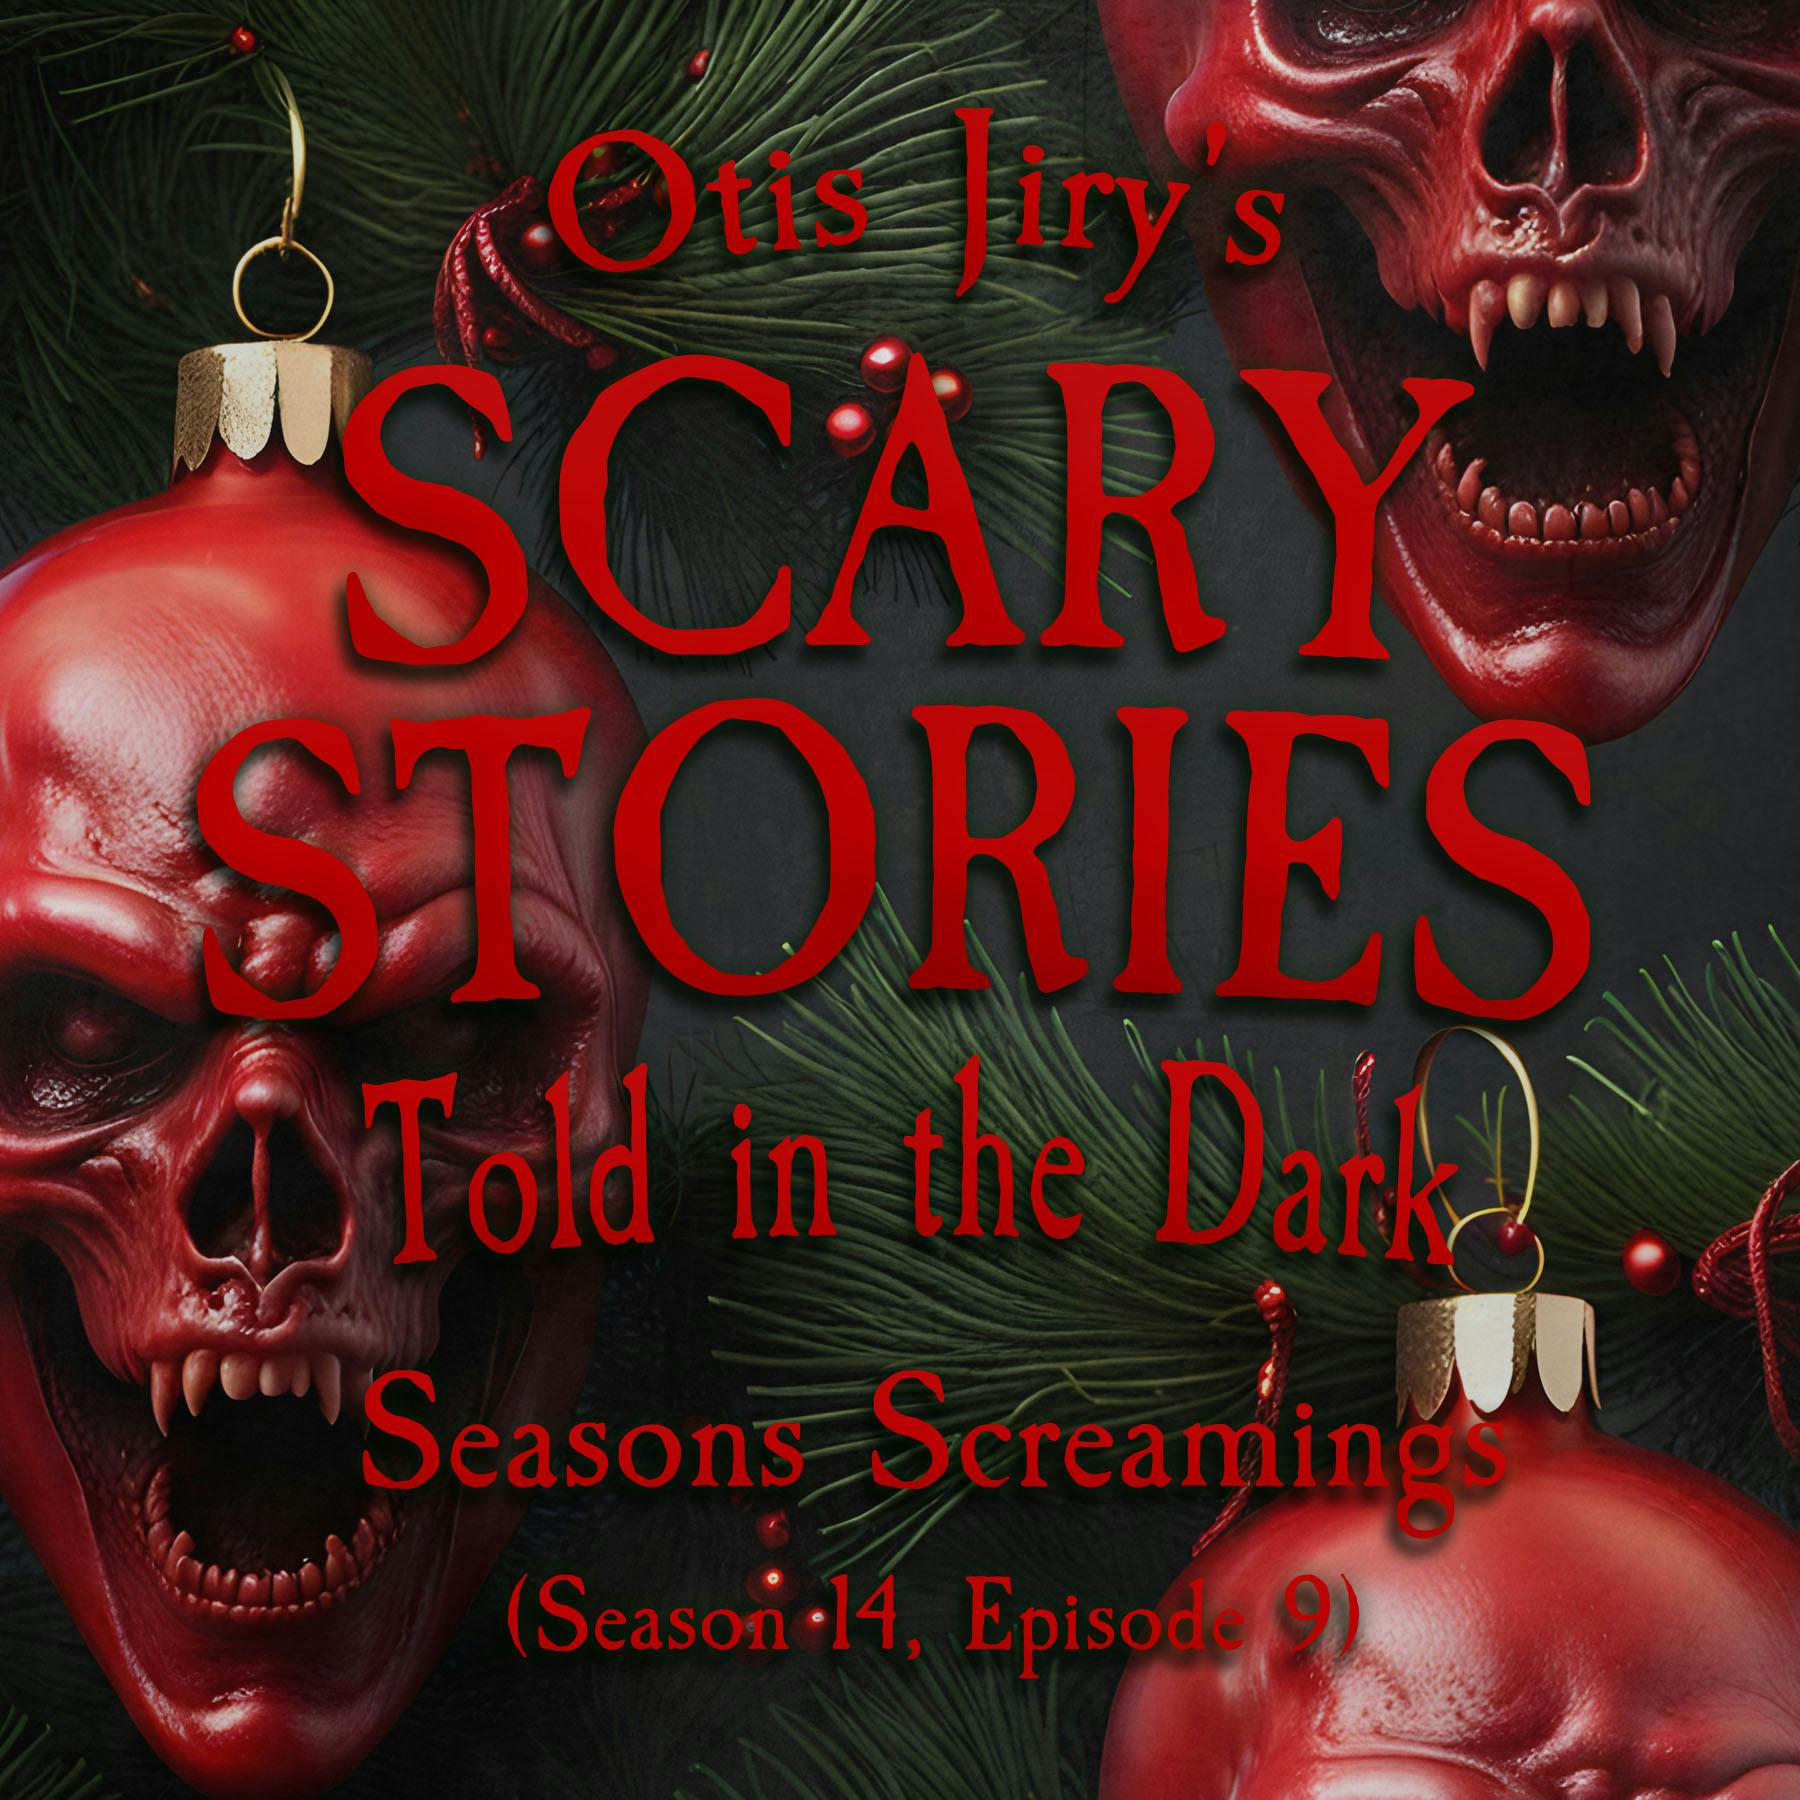 S14E09 - ”Season’s Screamings” – Scary Stories Told in the Dark